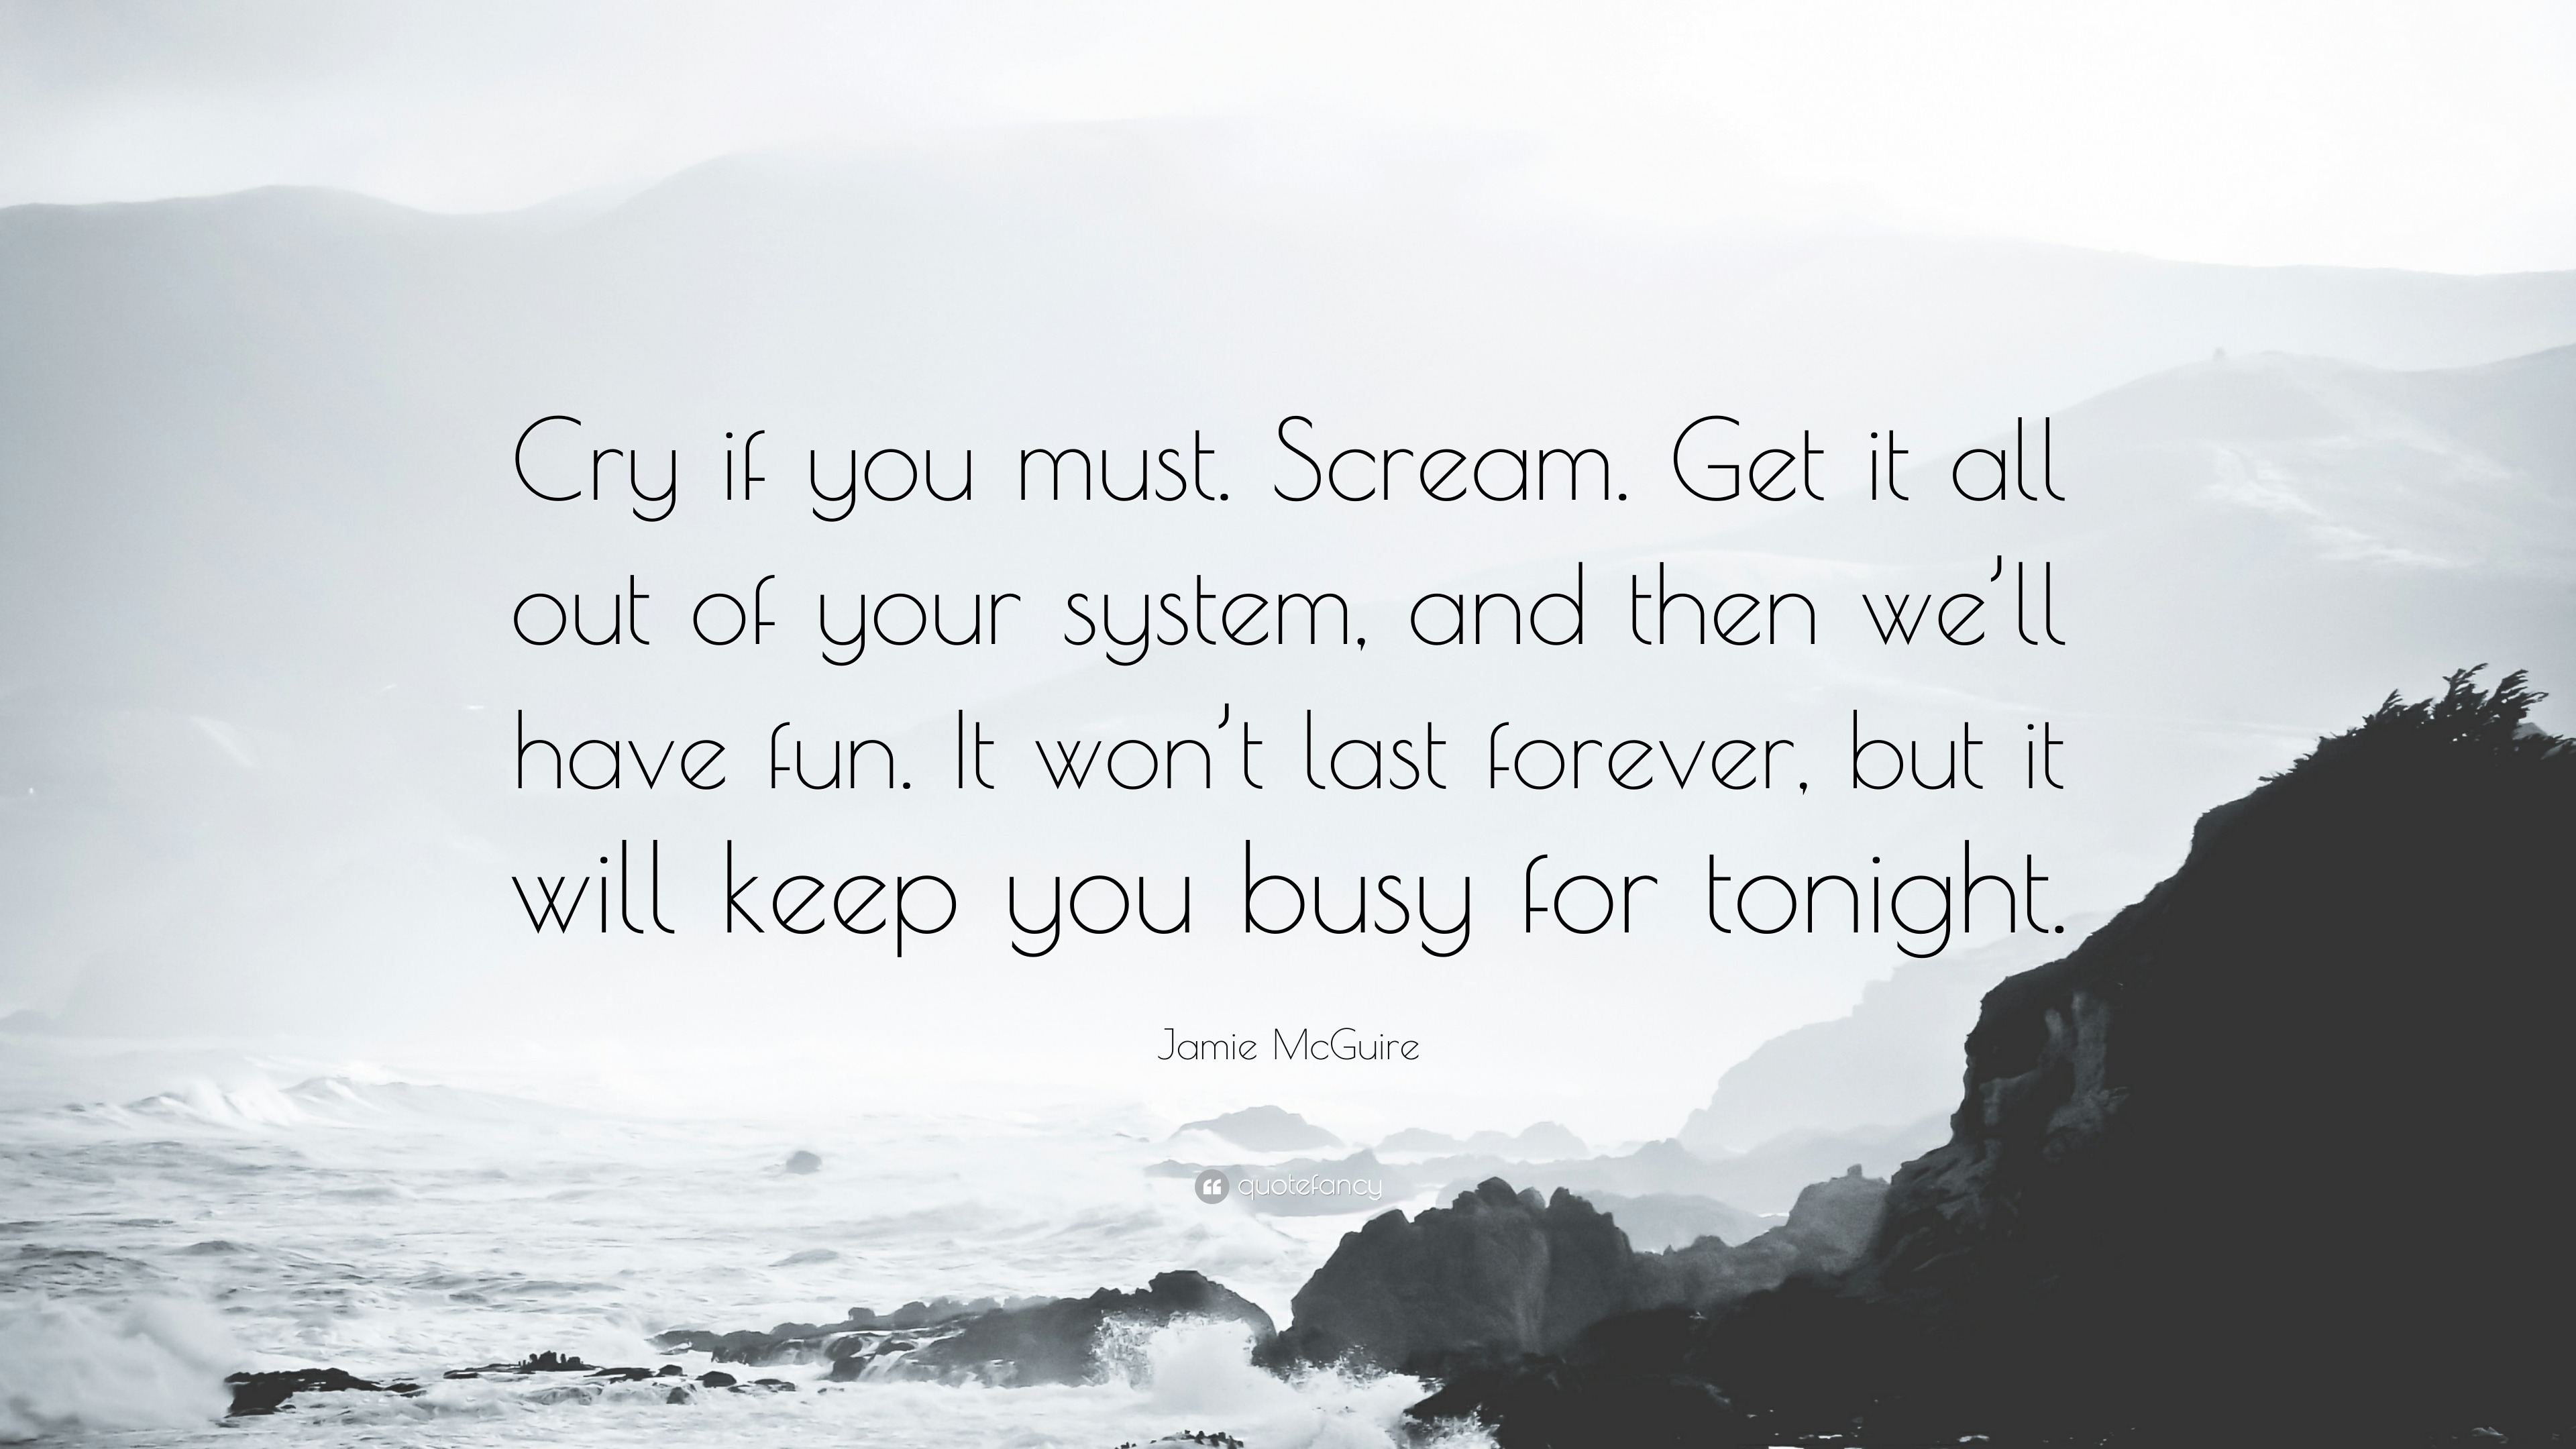 https://quotefancy.com/media/wallpaper/3840x2160/1691772-Jamie-McGuire-Quote-Cry-if-you-must-Scream-Get-it-all-out-of-your.jpg